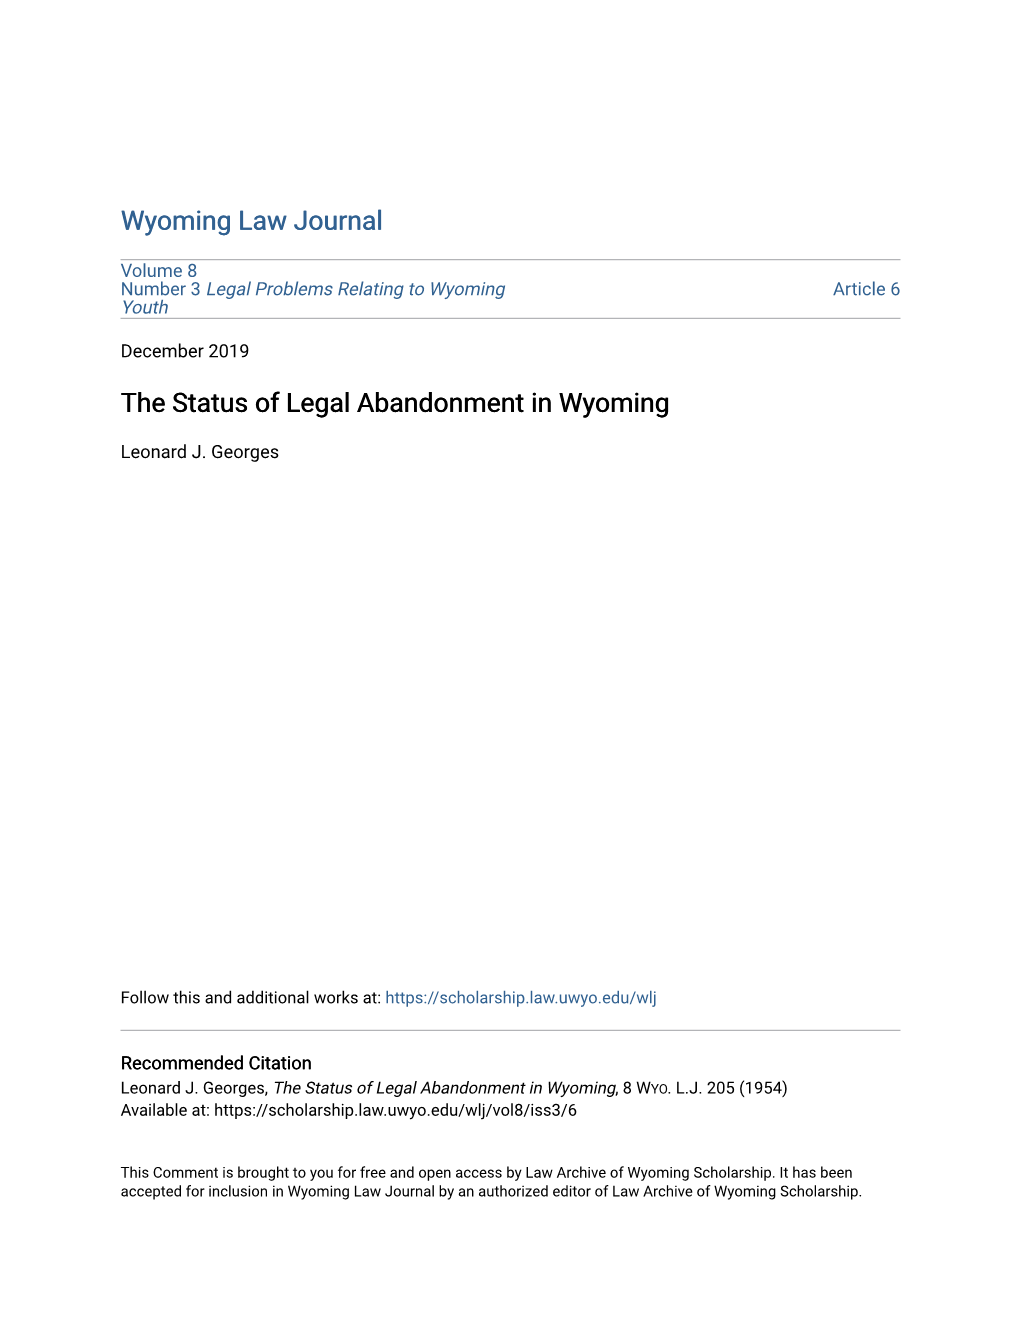 The Status of Legal Abandonment in Wyoming